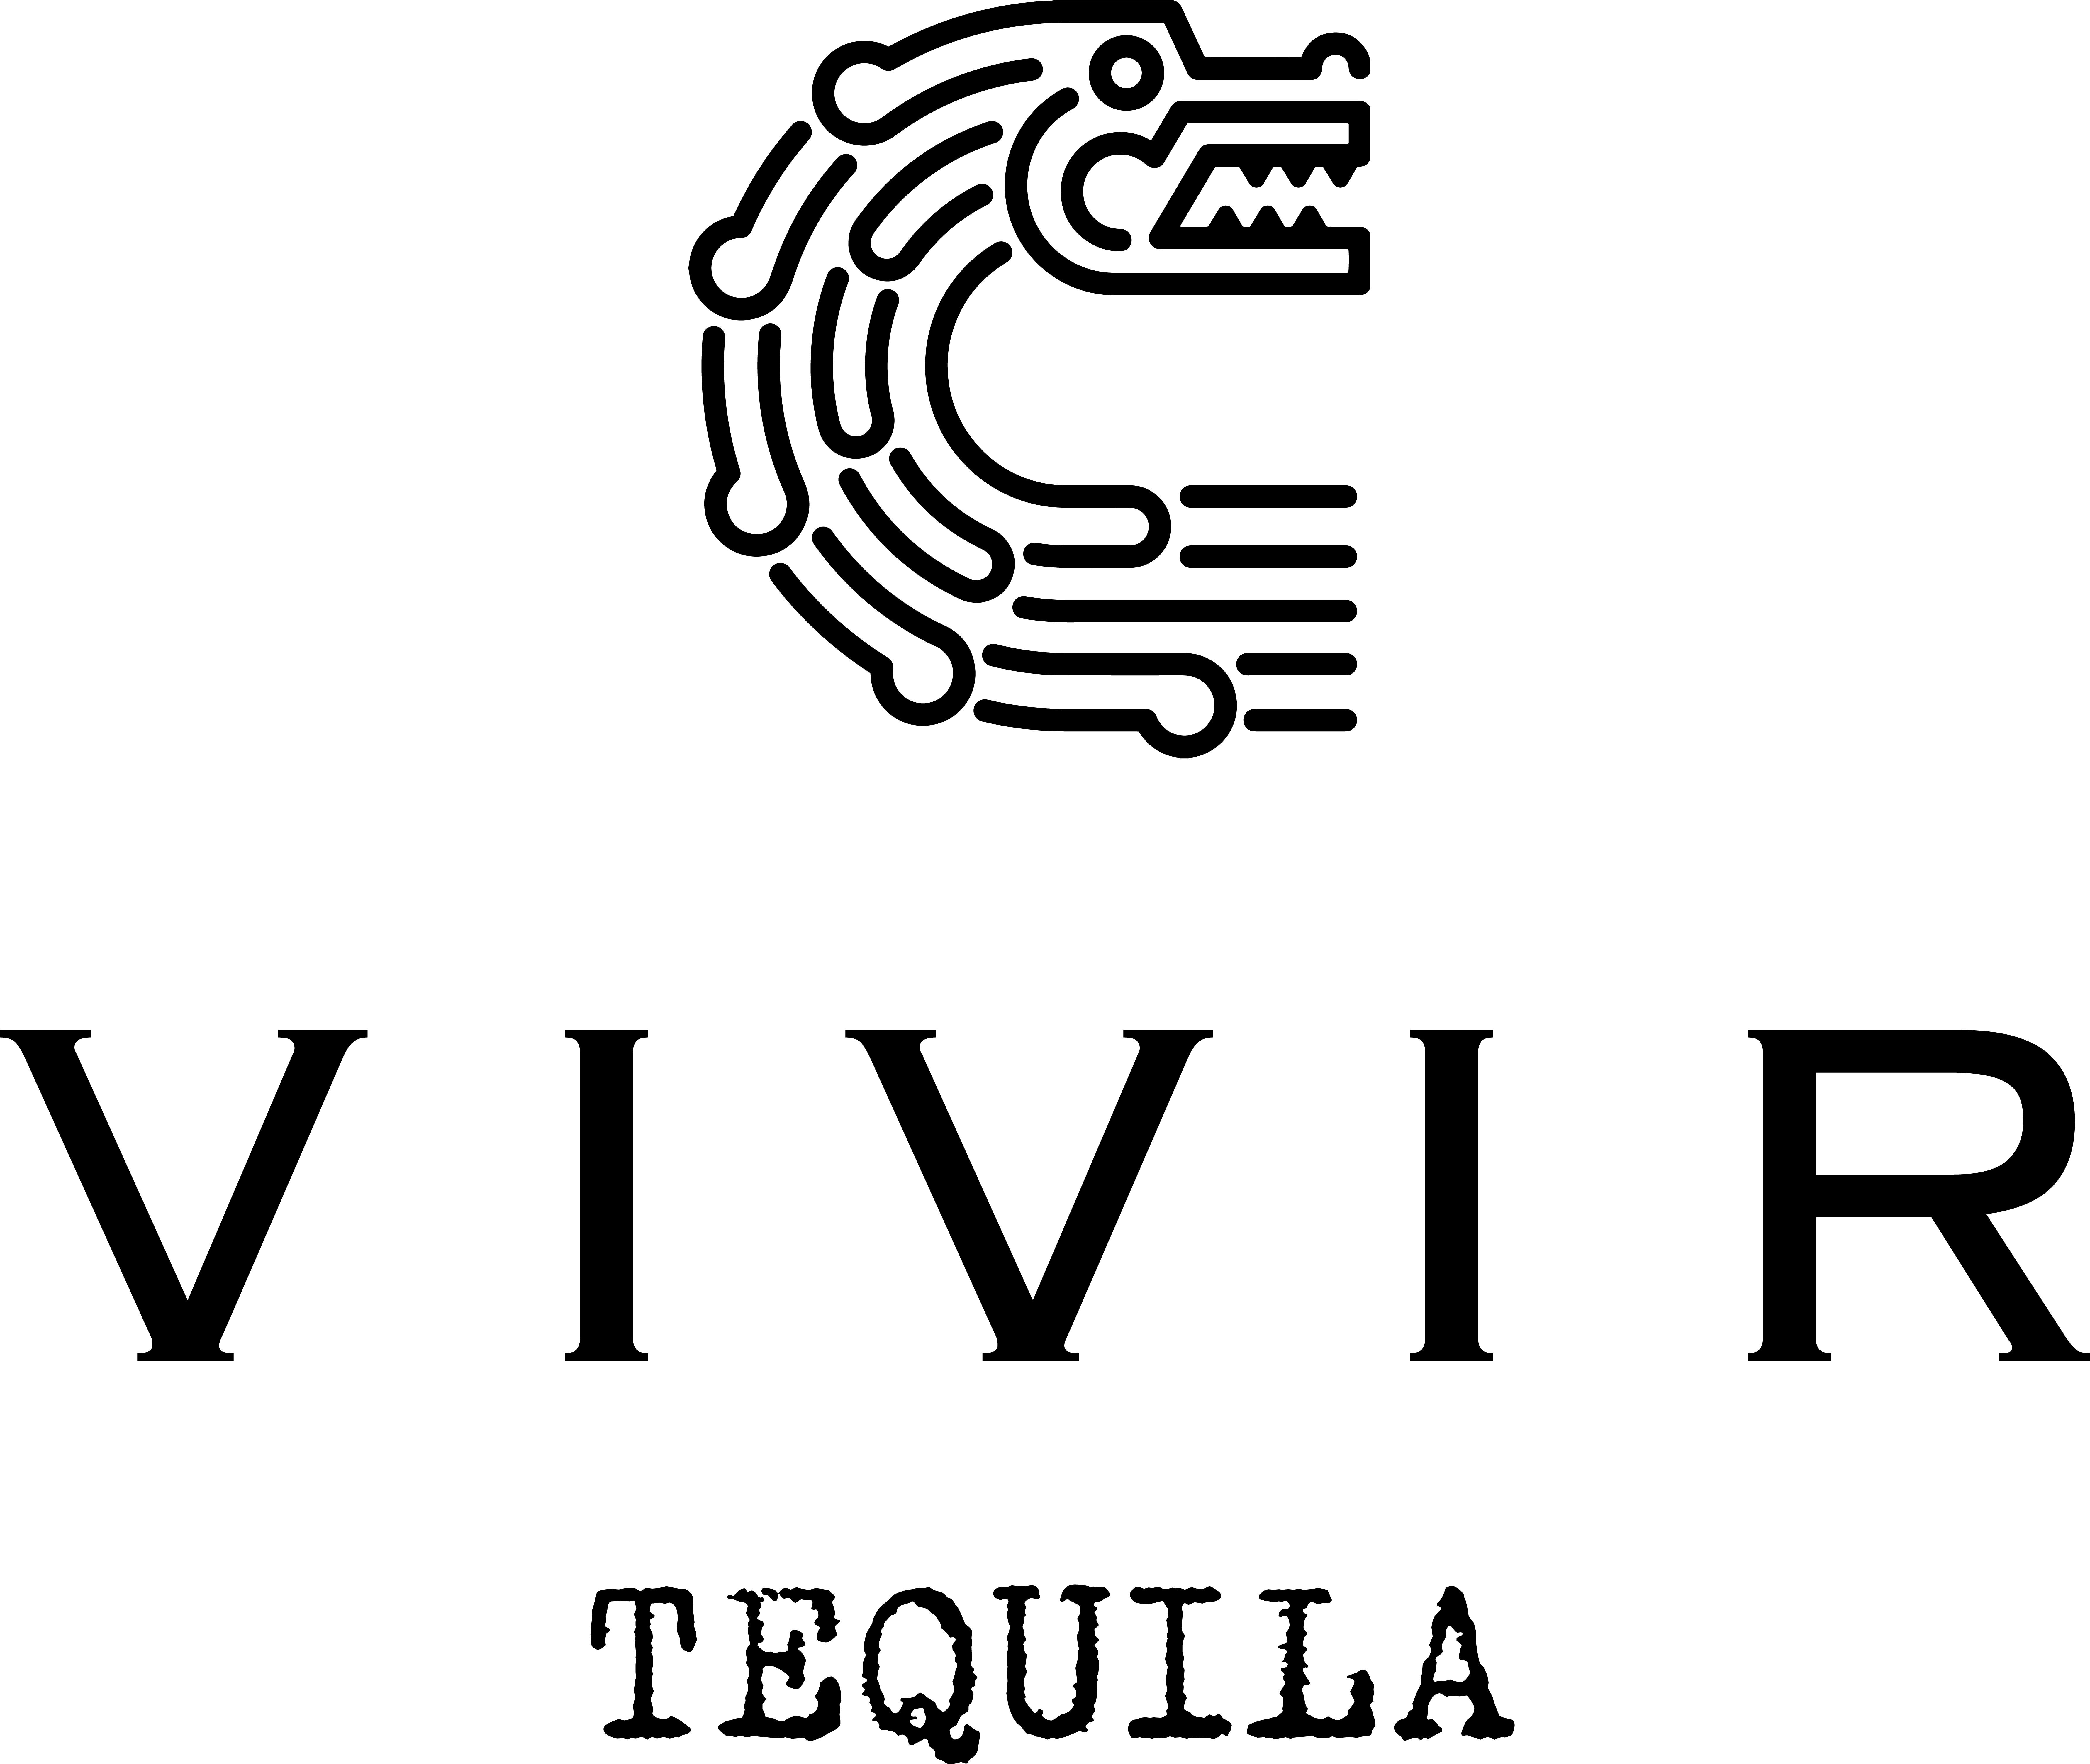 VIVIR Tequila announce for this years National Reality Television Awards